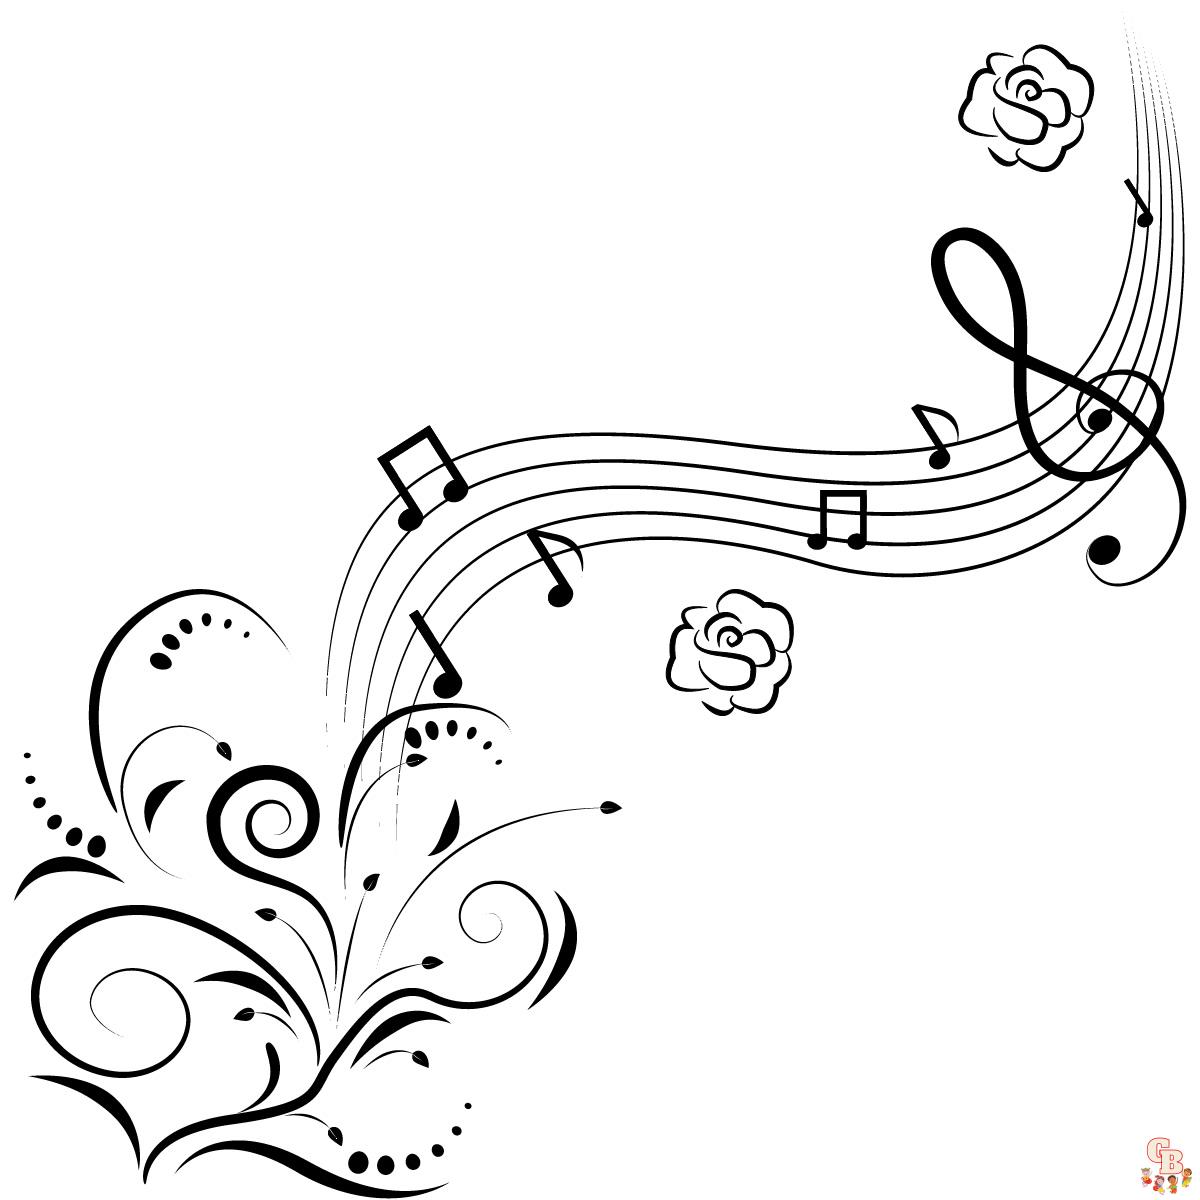 Music coloring pages for kids